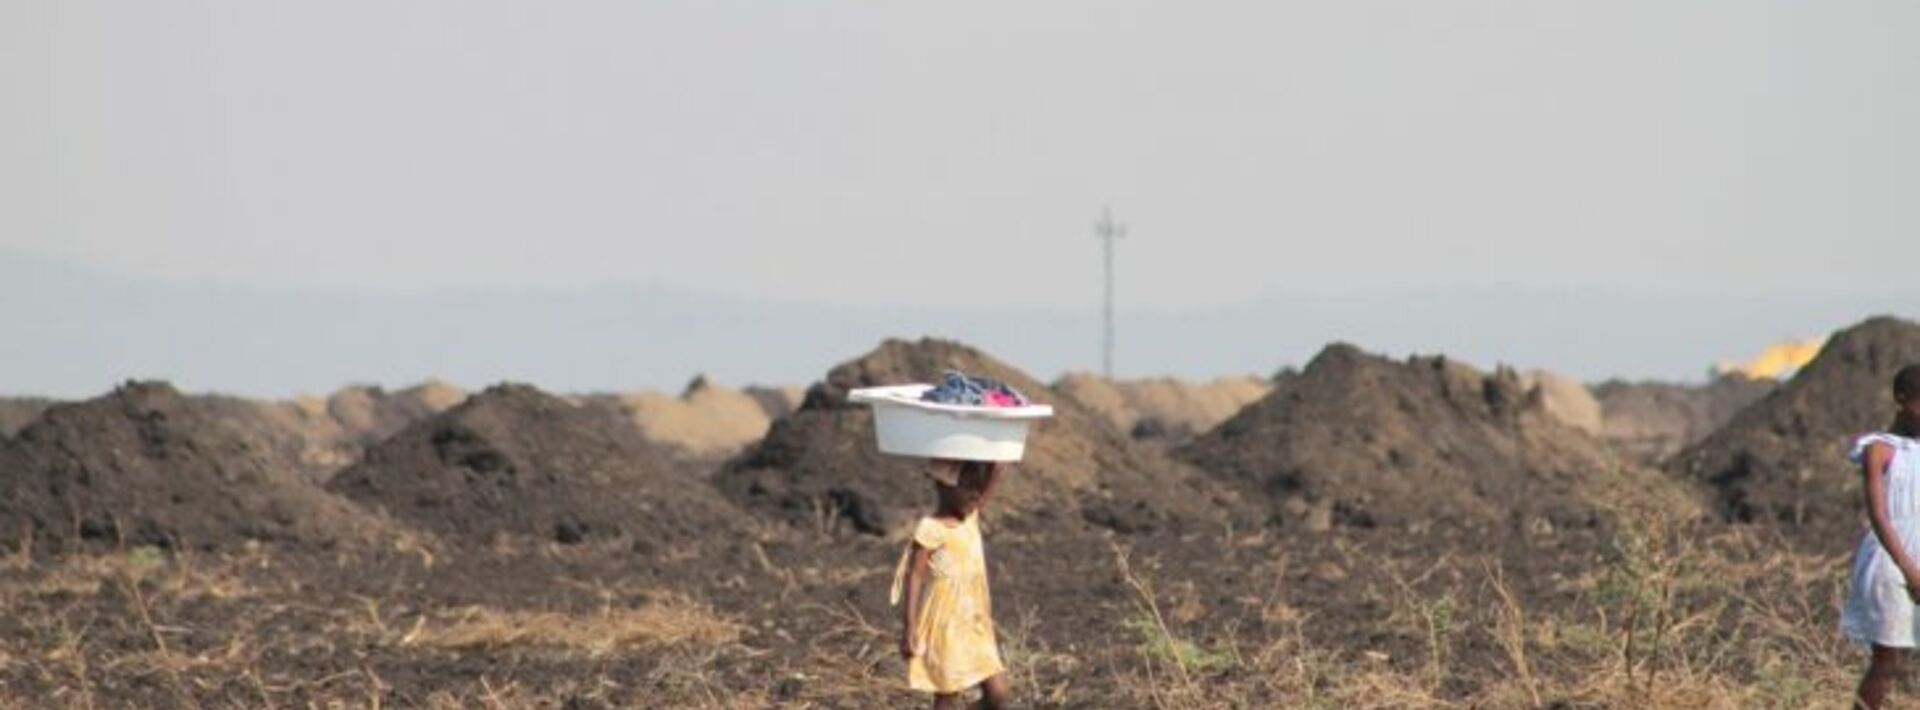 a child carrying a bucket on their head walking through a landscape that is bare and tan without much vegetation